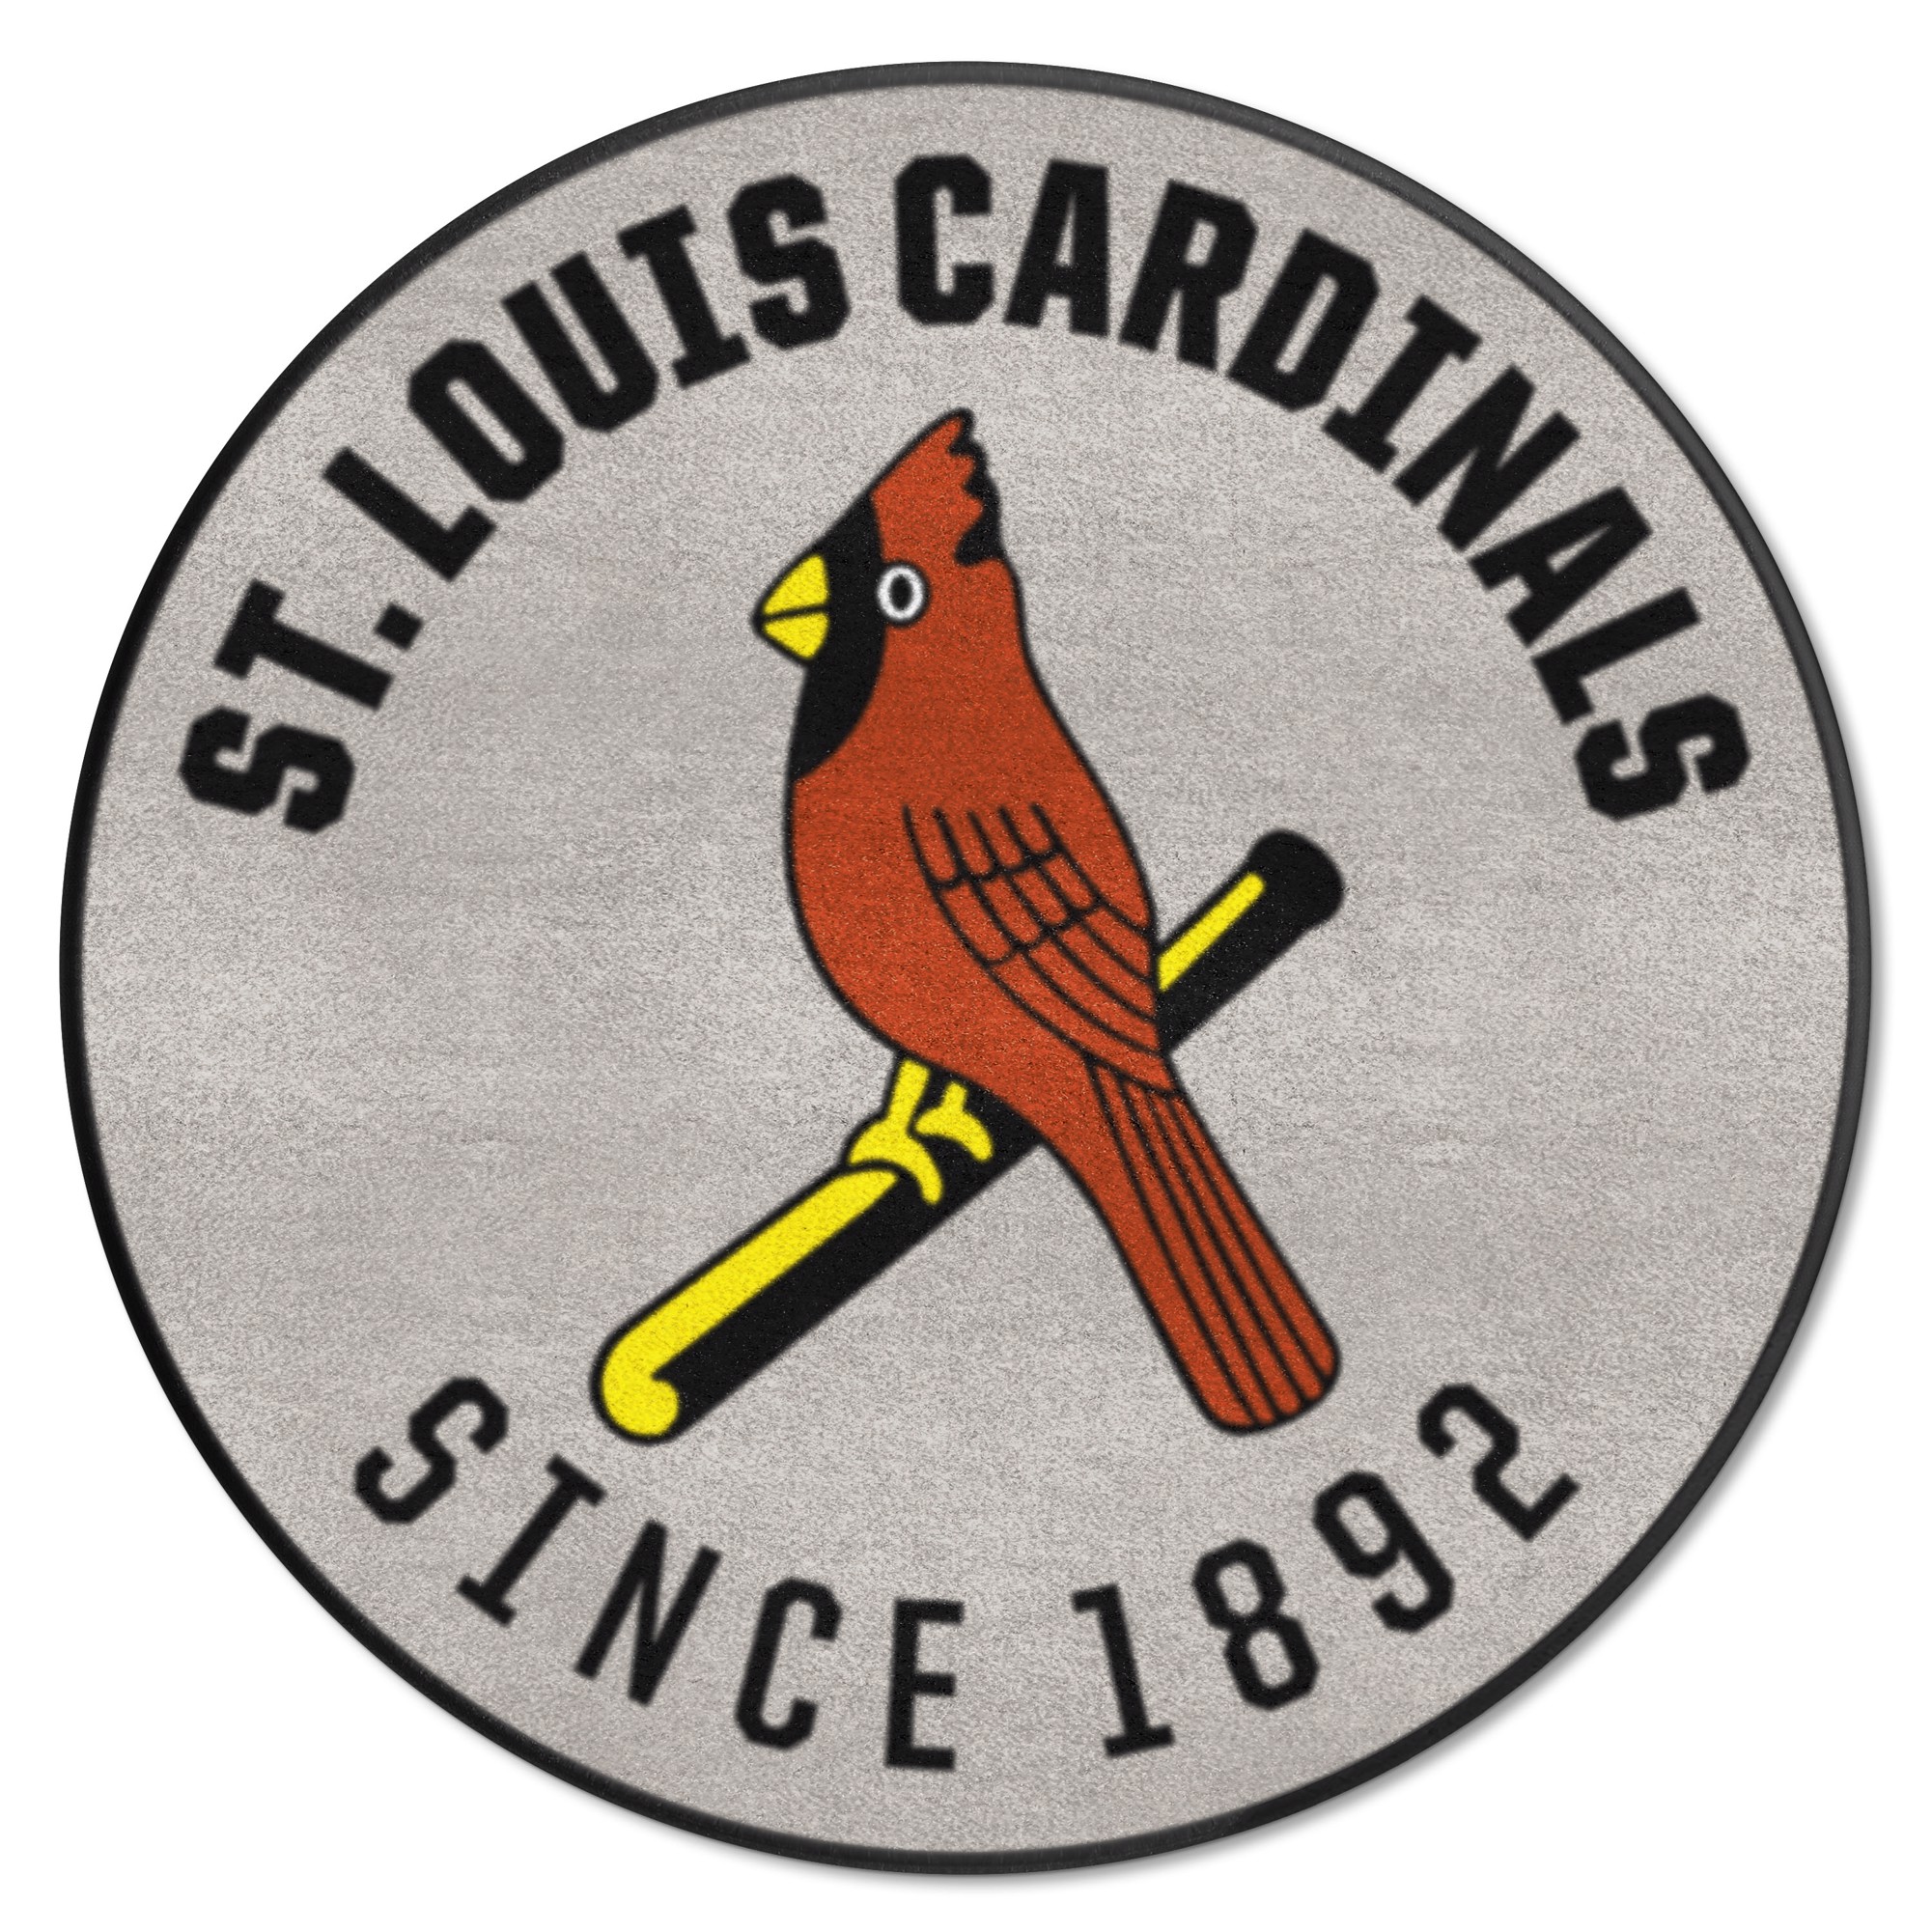 Fanmats  St. Louis Cardinals Ticket Runner - Retro Collection